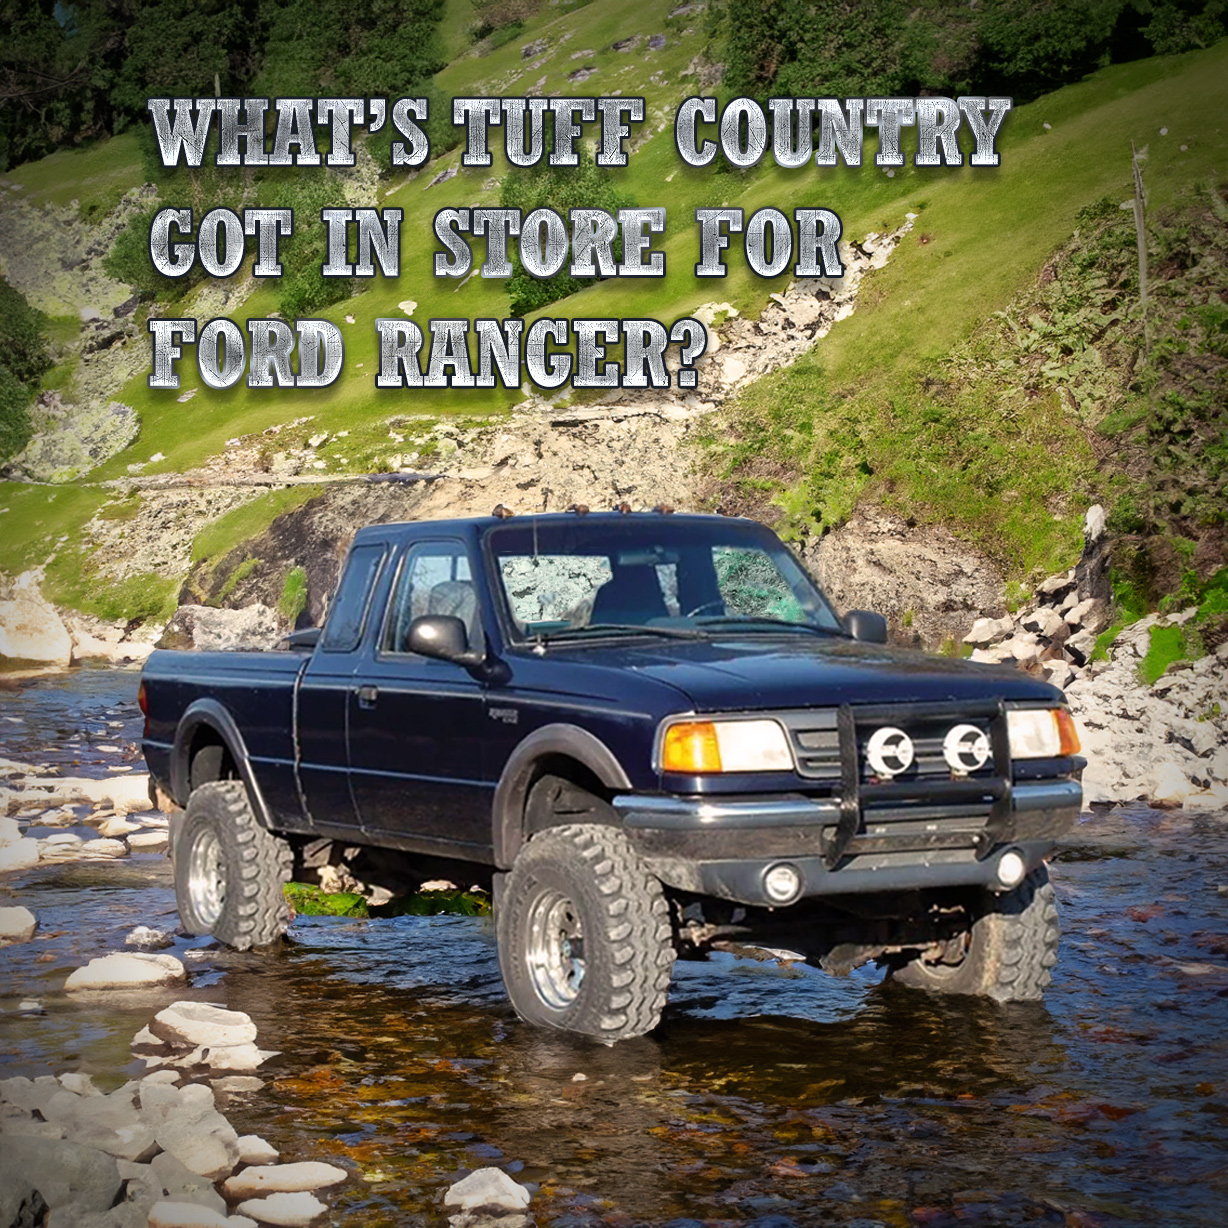 Whats Tuff Country got in store for Ford Ranger